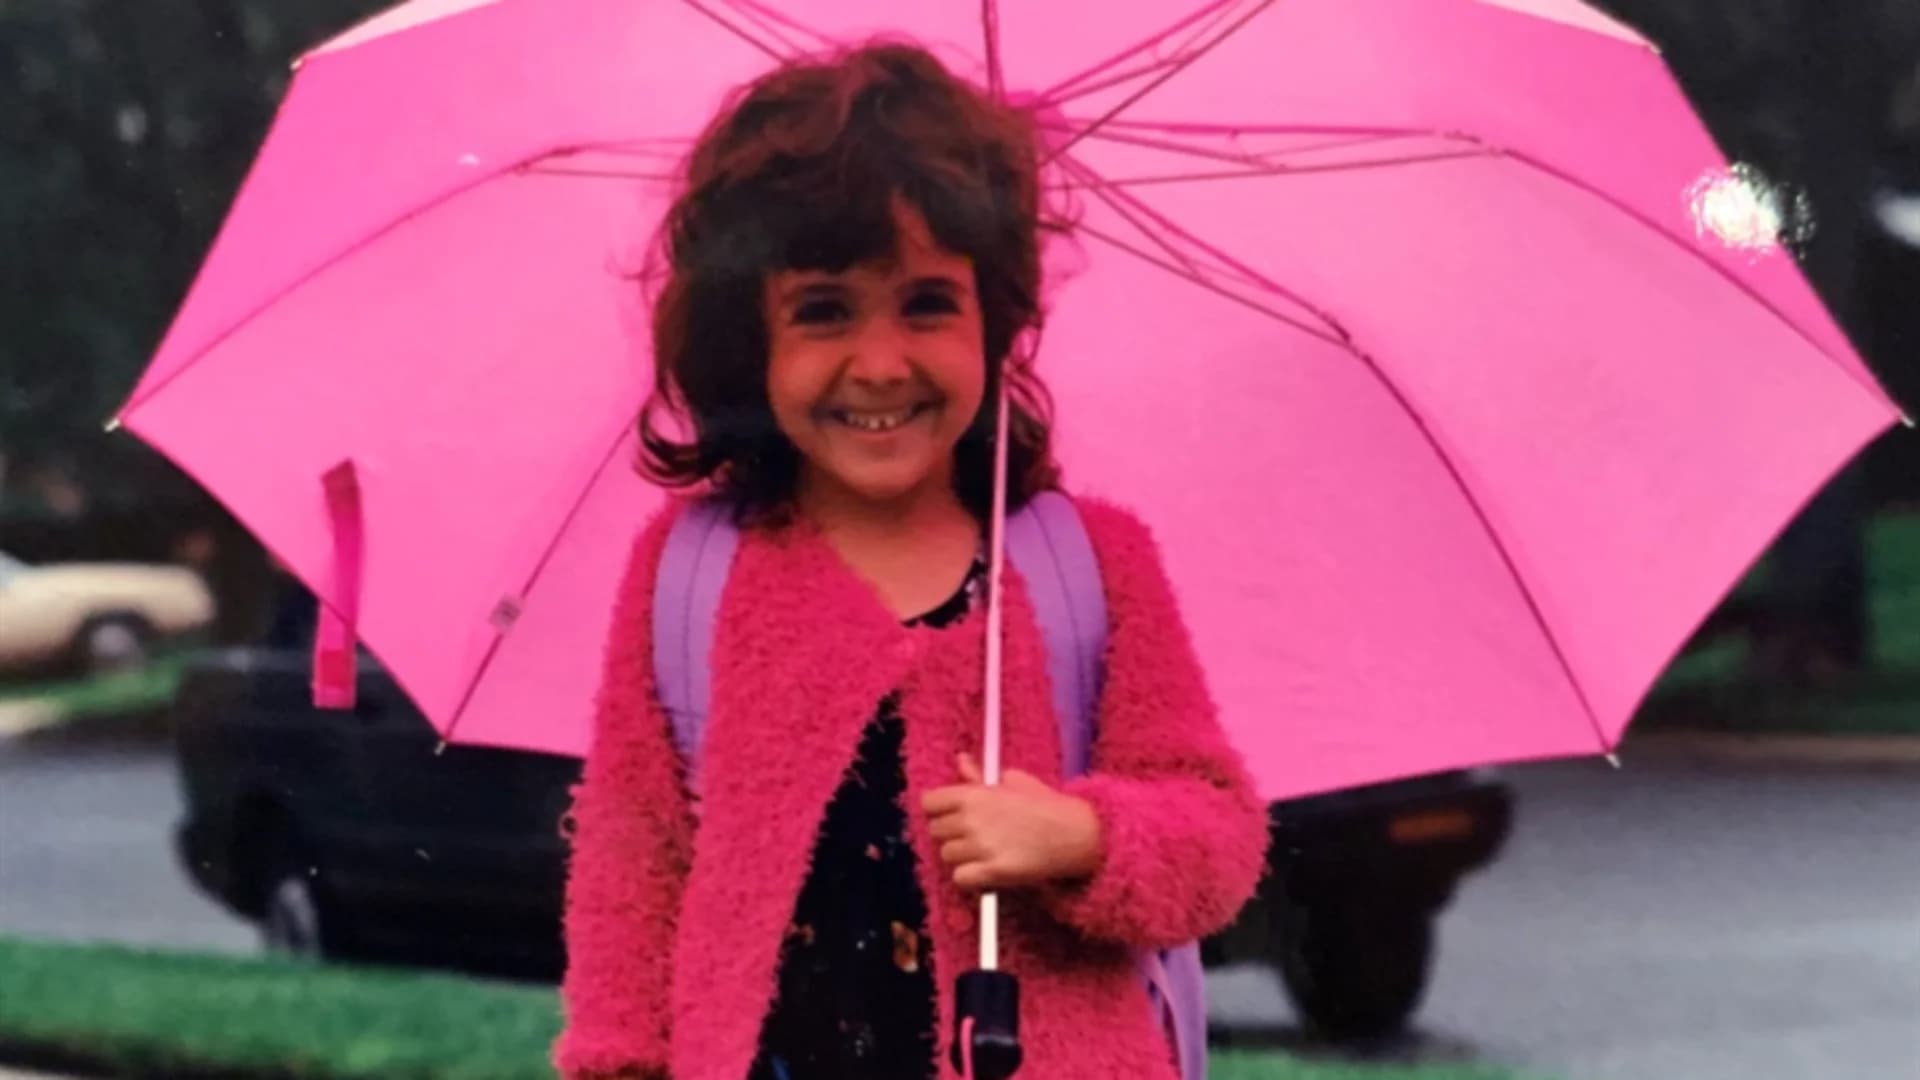 Throwback! News 12 staff's back to school photos